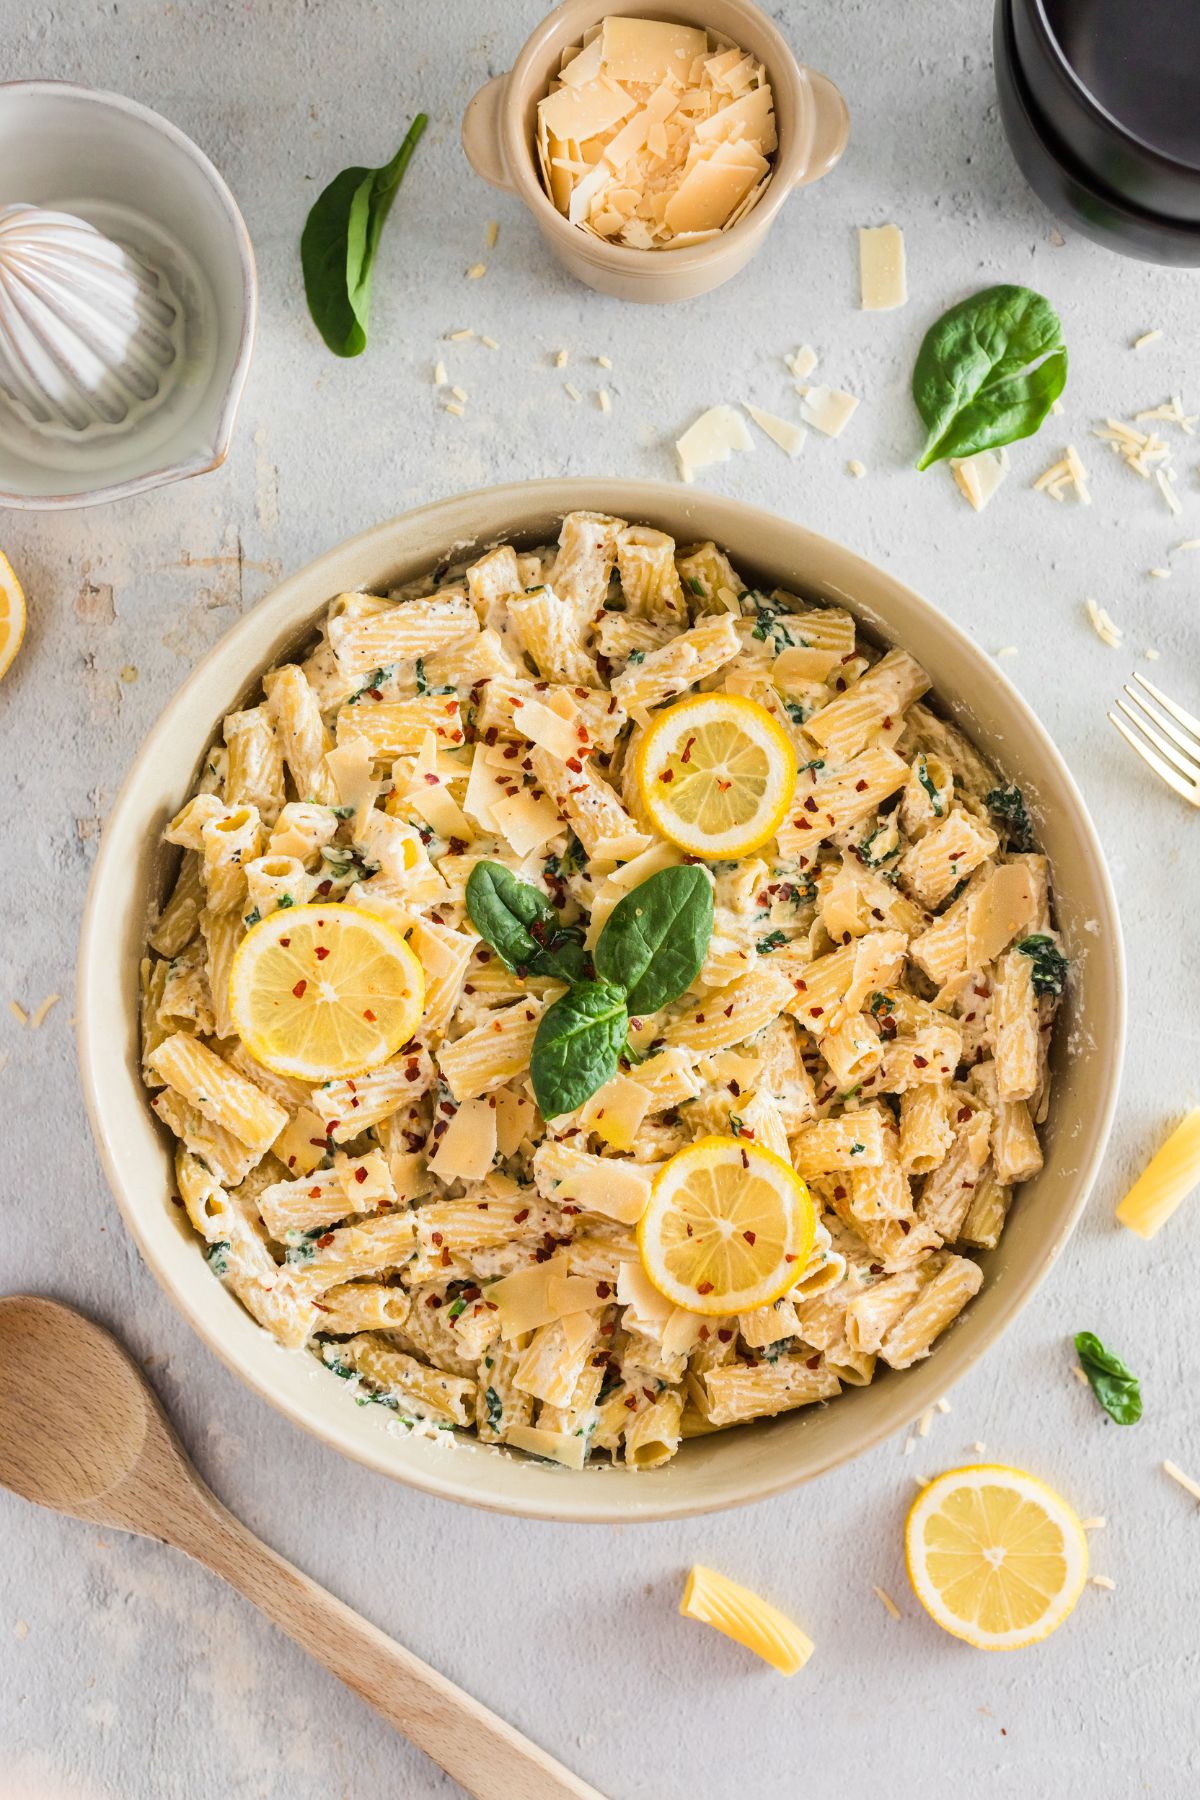 A serving dish with some Lemon Ricotta Pasta.